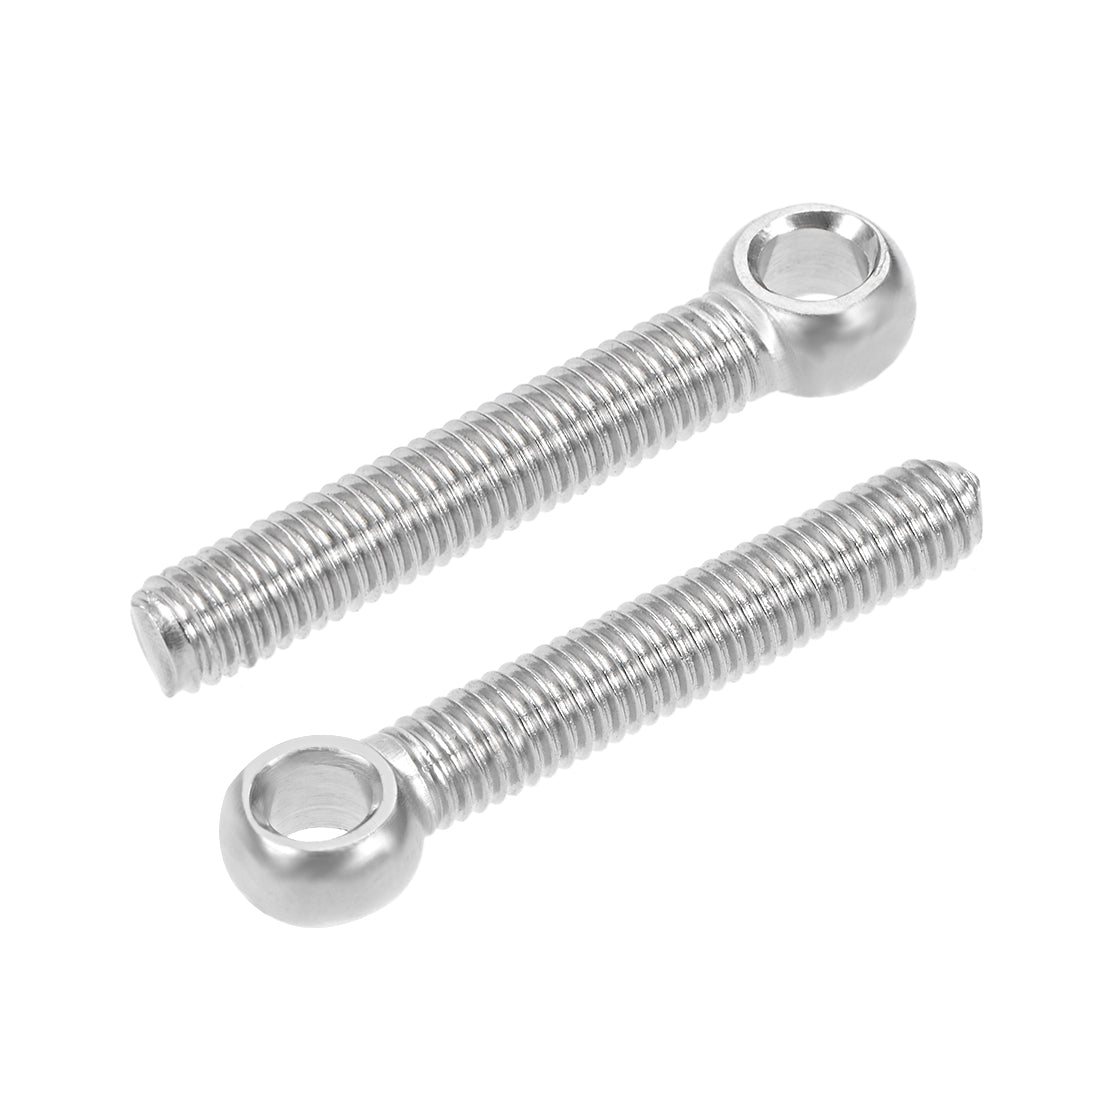 Uxcell Uxcell M5 x 35mm 304 Stainless Steel Machine Shoulder Lift Eye Bolt Rigging 20pcs